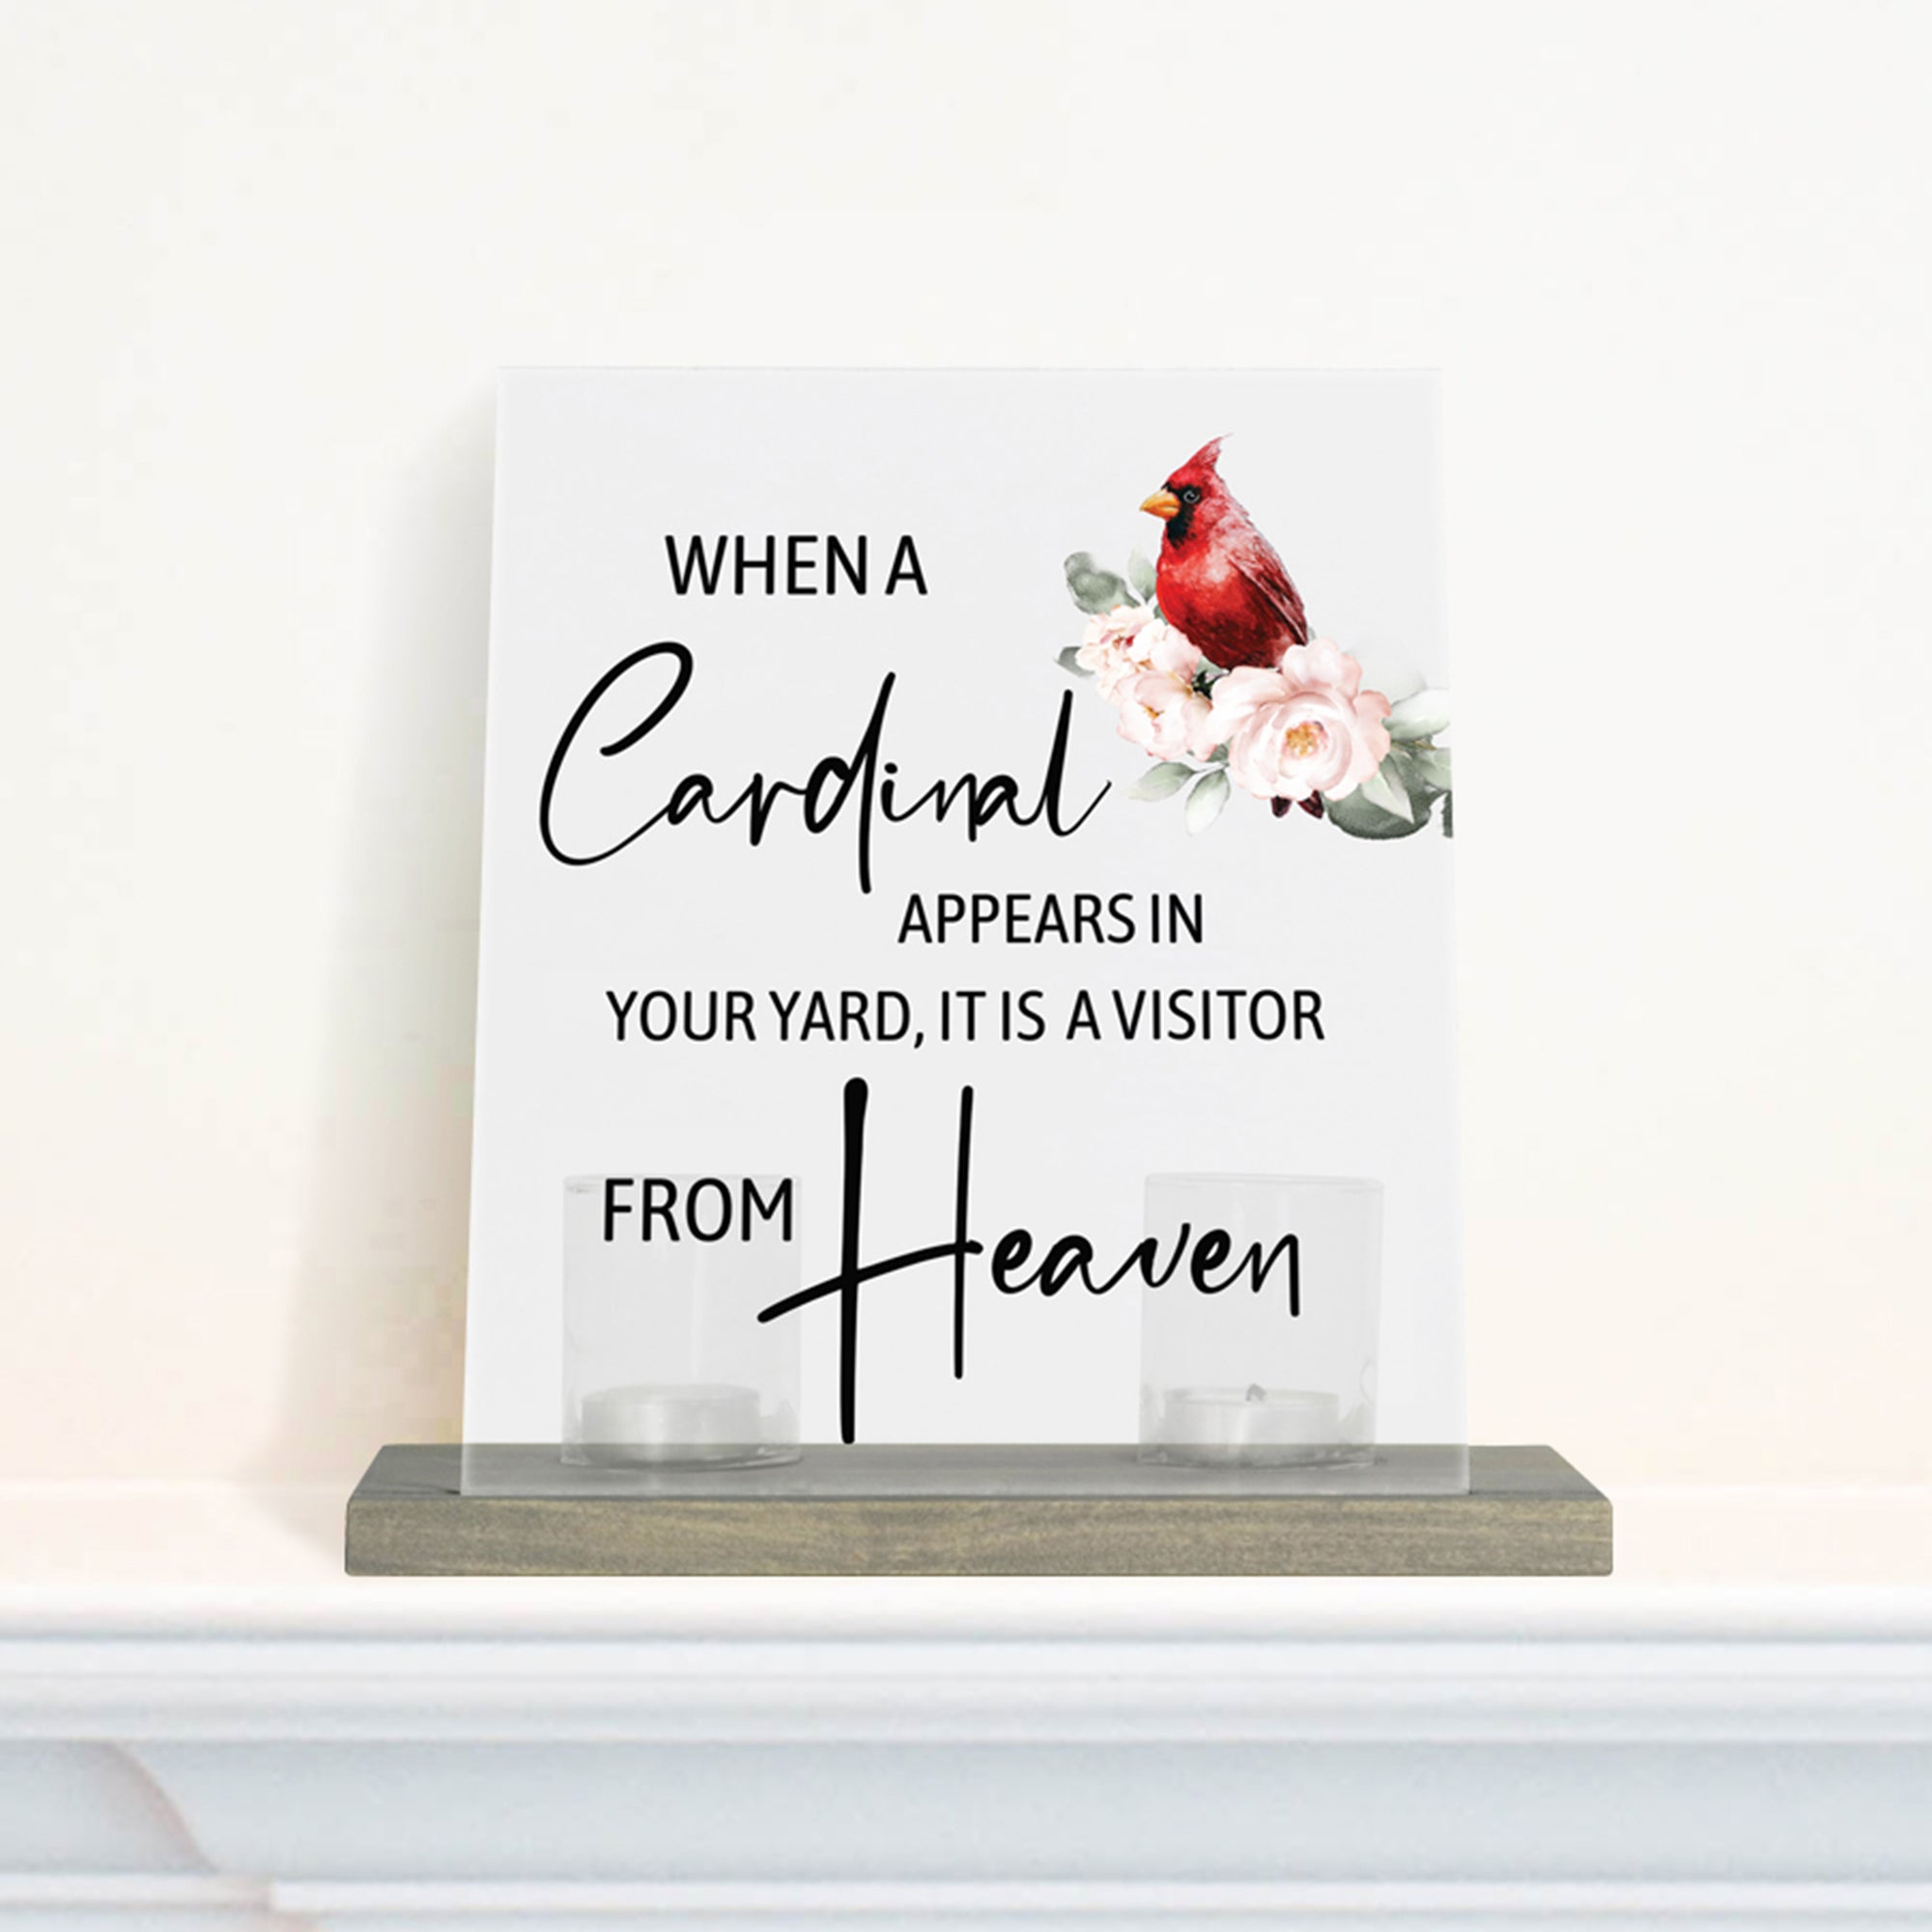 Vintage Memorial Cardinal Acrylic Sign Candle Holder With Wood Base And Glass Votives For Home Décor | When Cardinal Appears